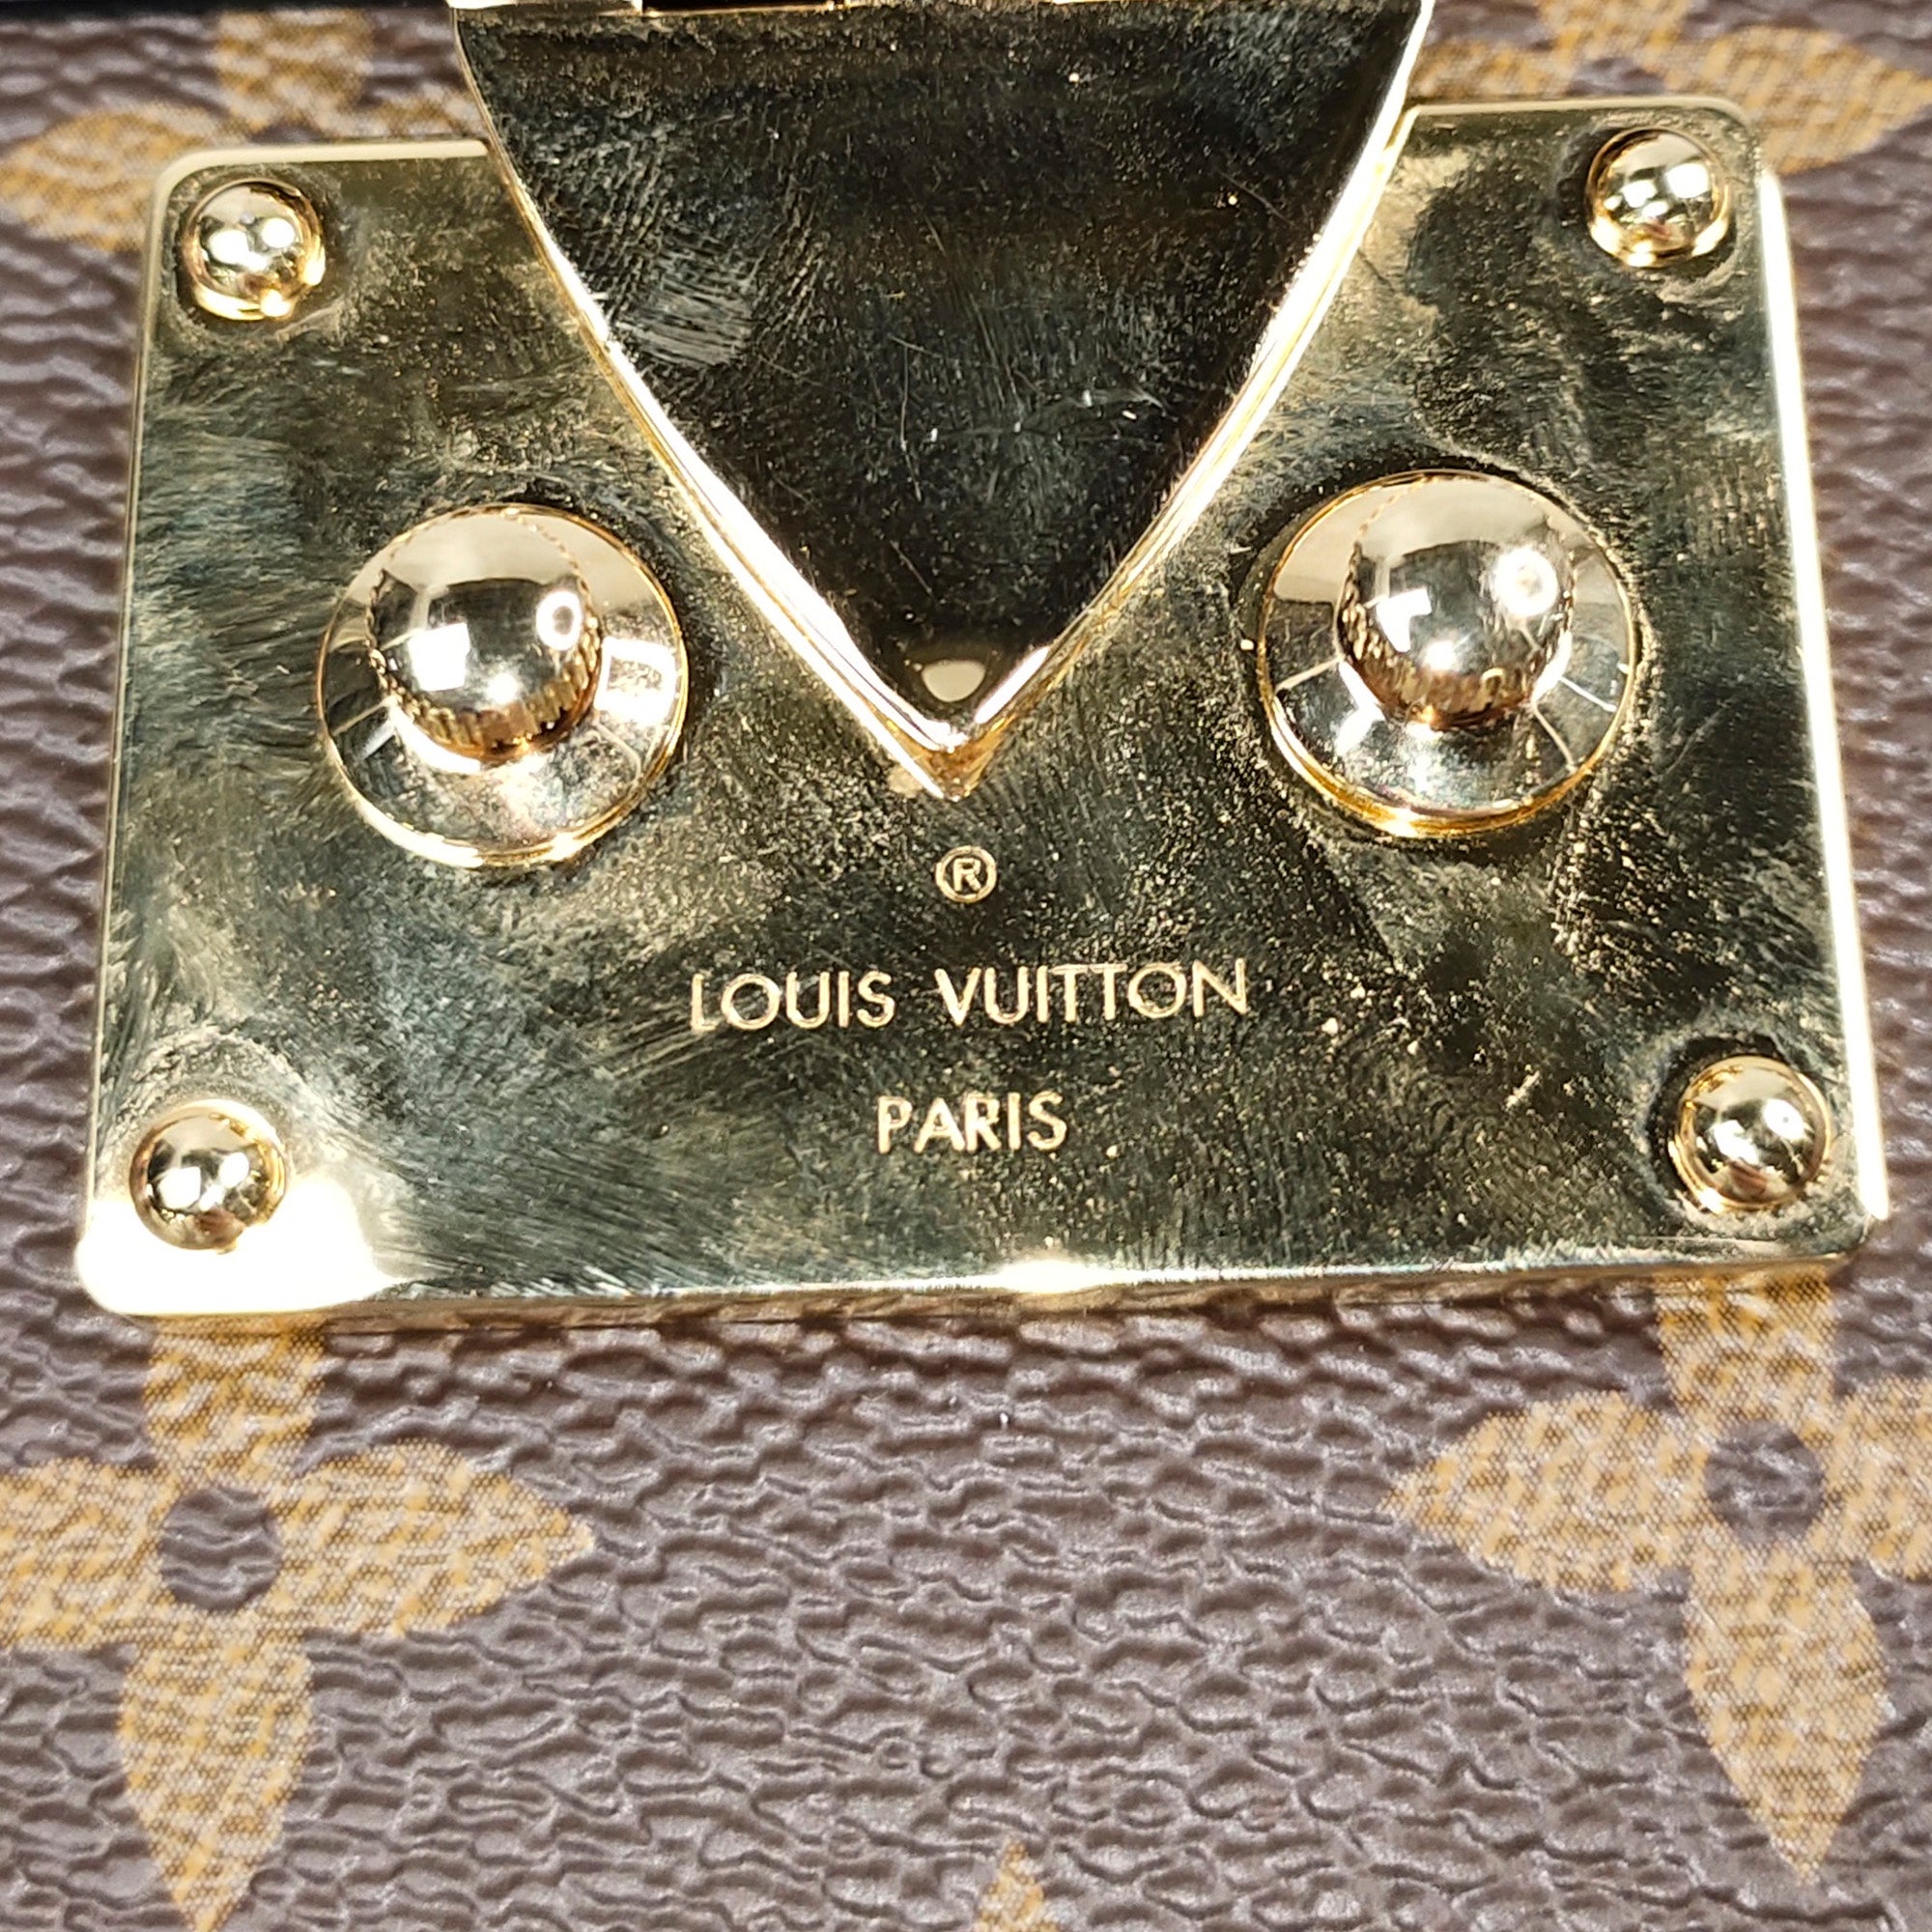 Scratches on my LV Pochette Metis Lock!, Page 3